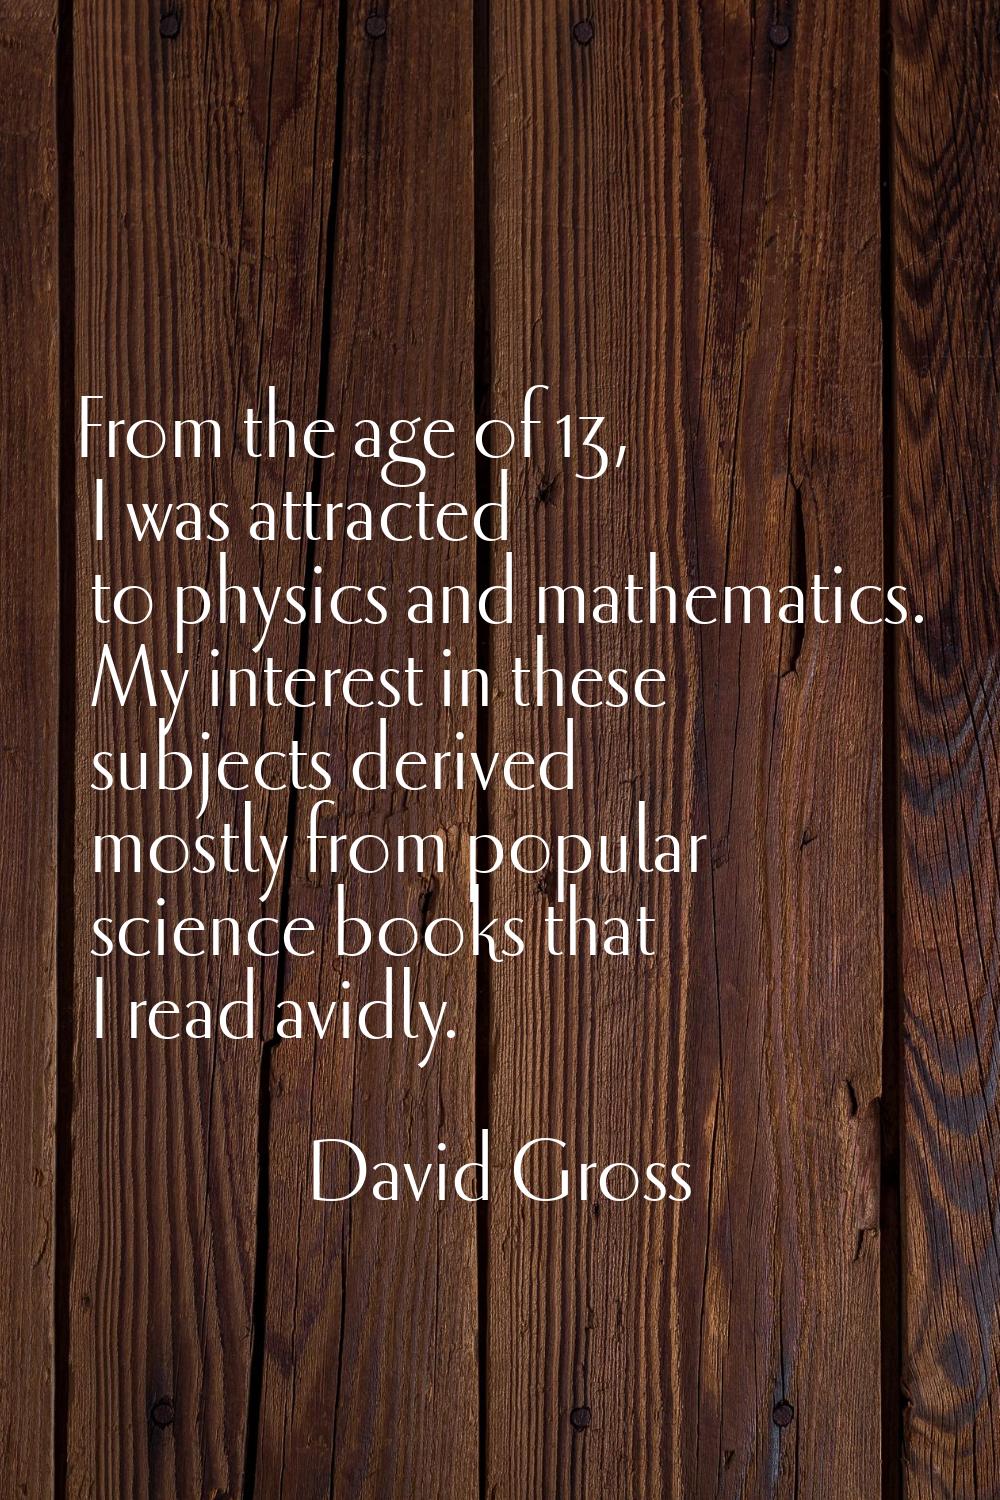 From the age of 13, I was attracted to physics and mathematics. My interest in these subjects deriv